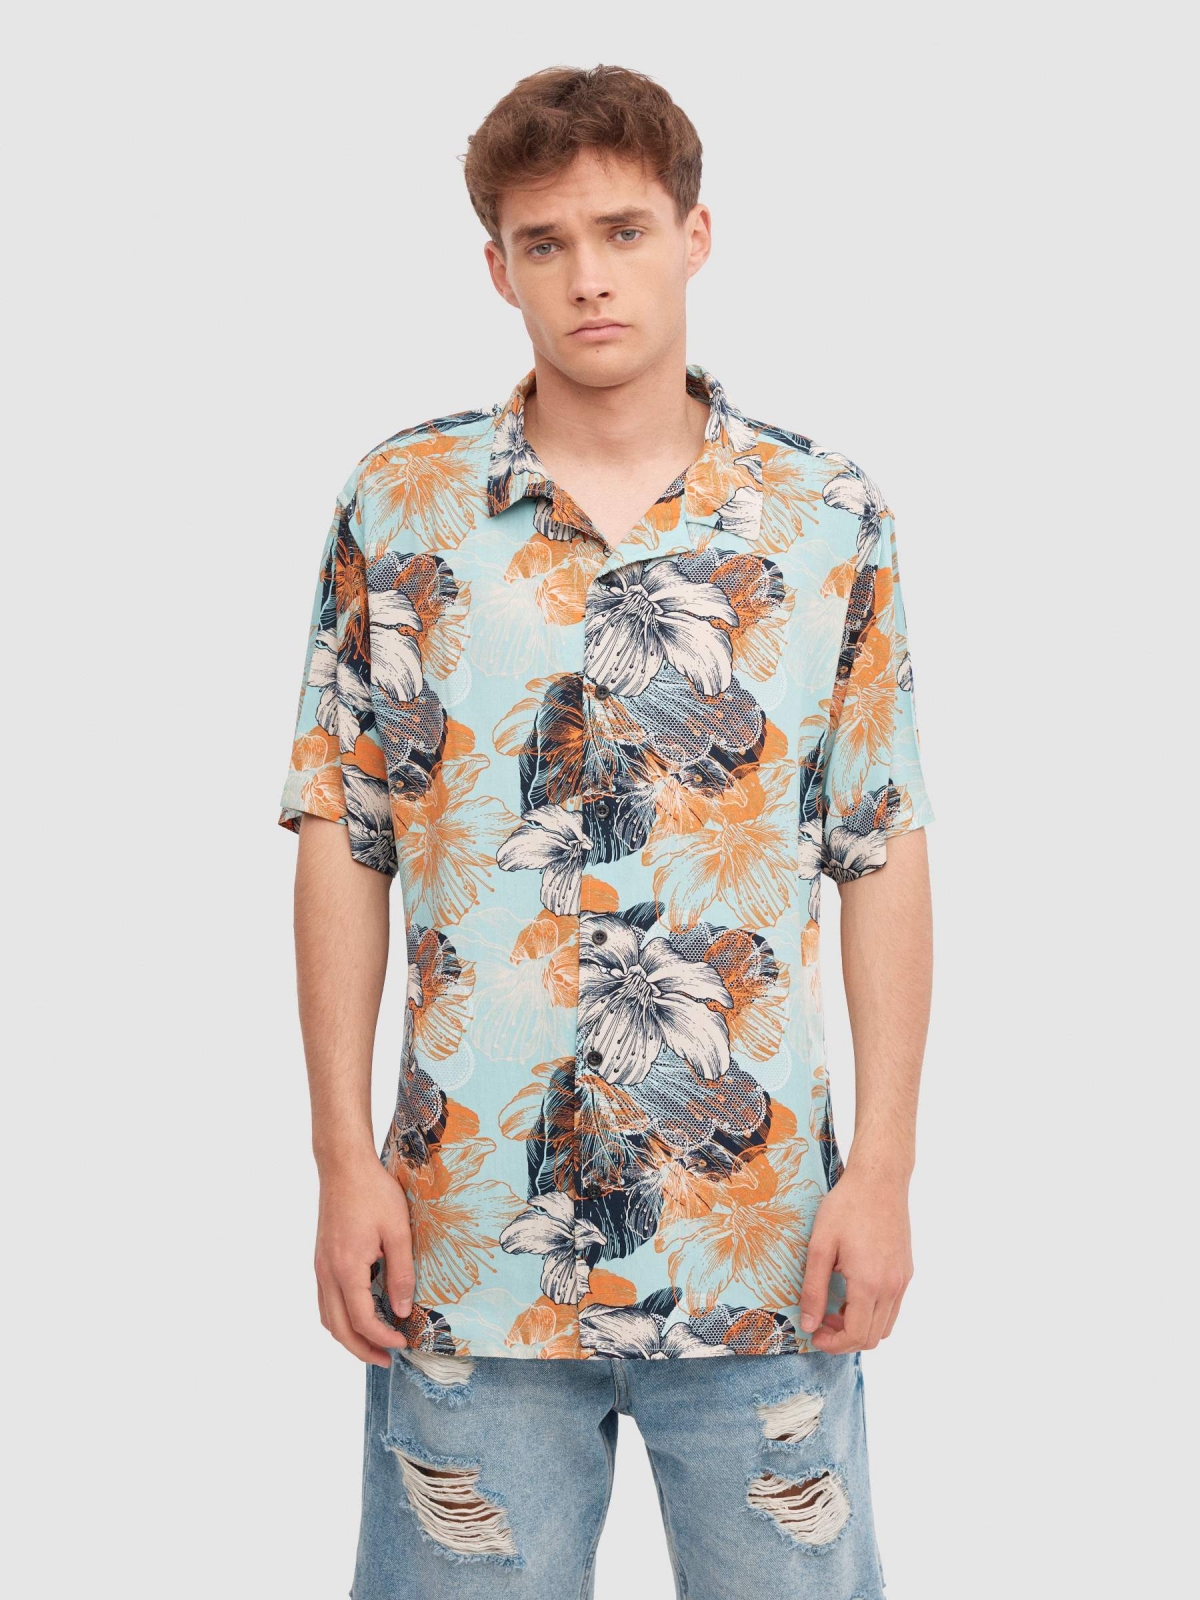 Floral shirt blue middle front view